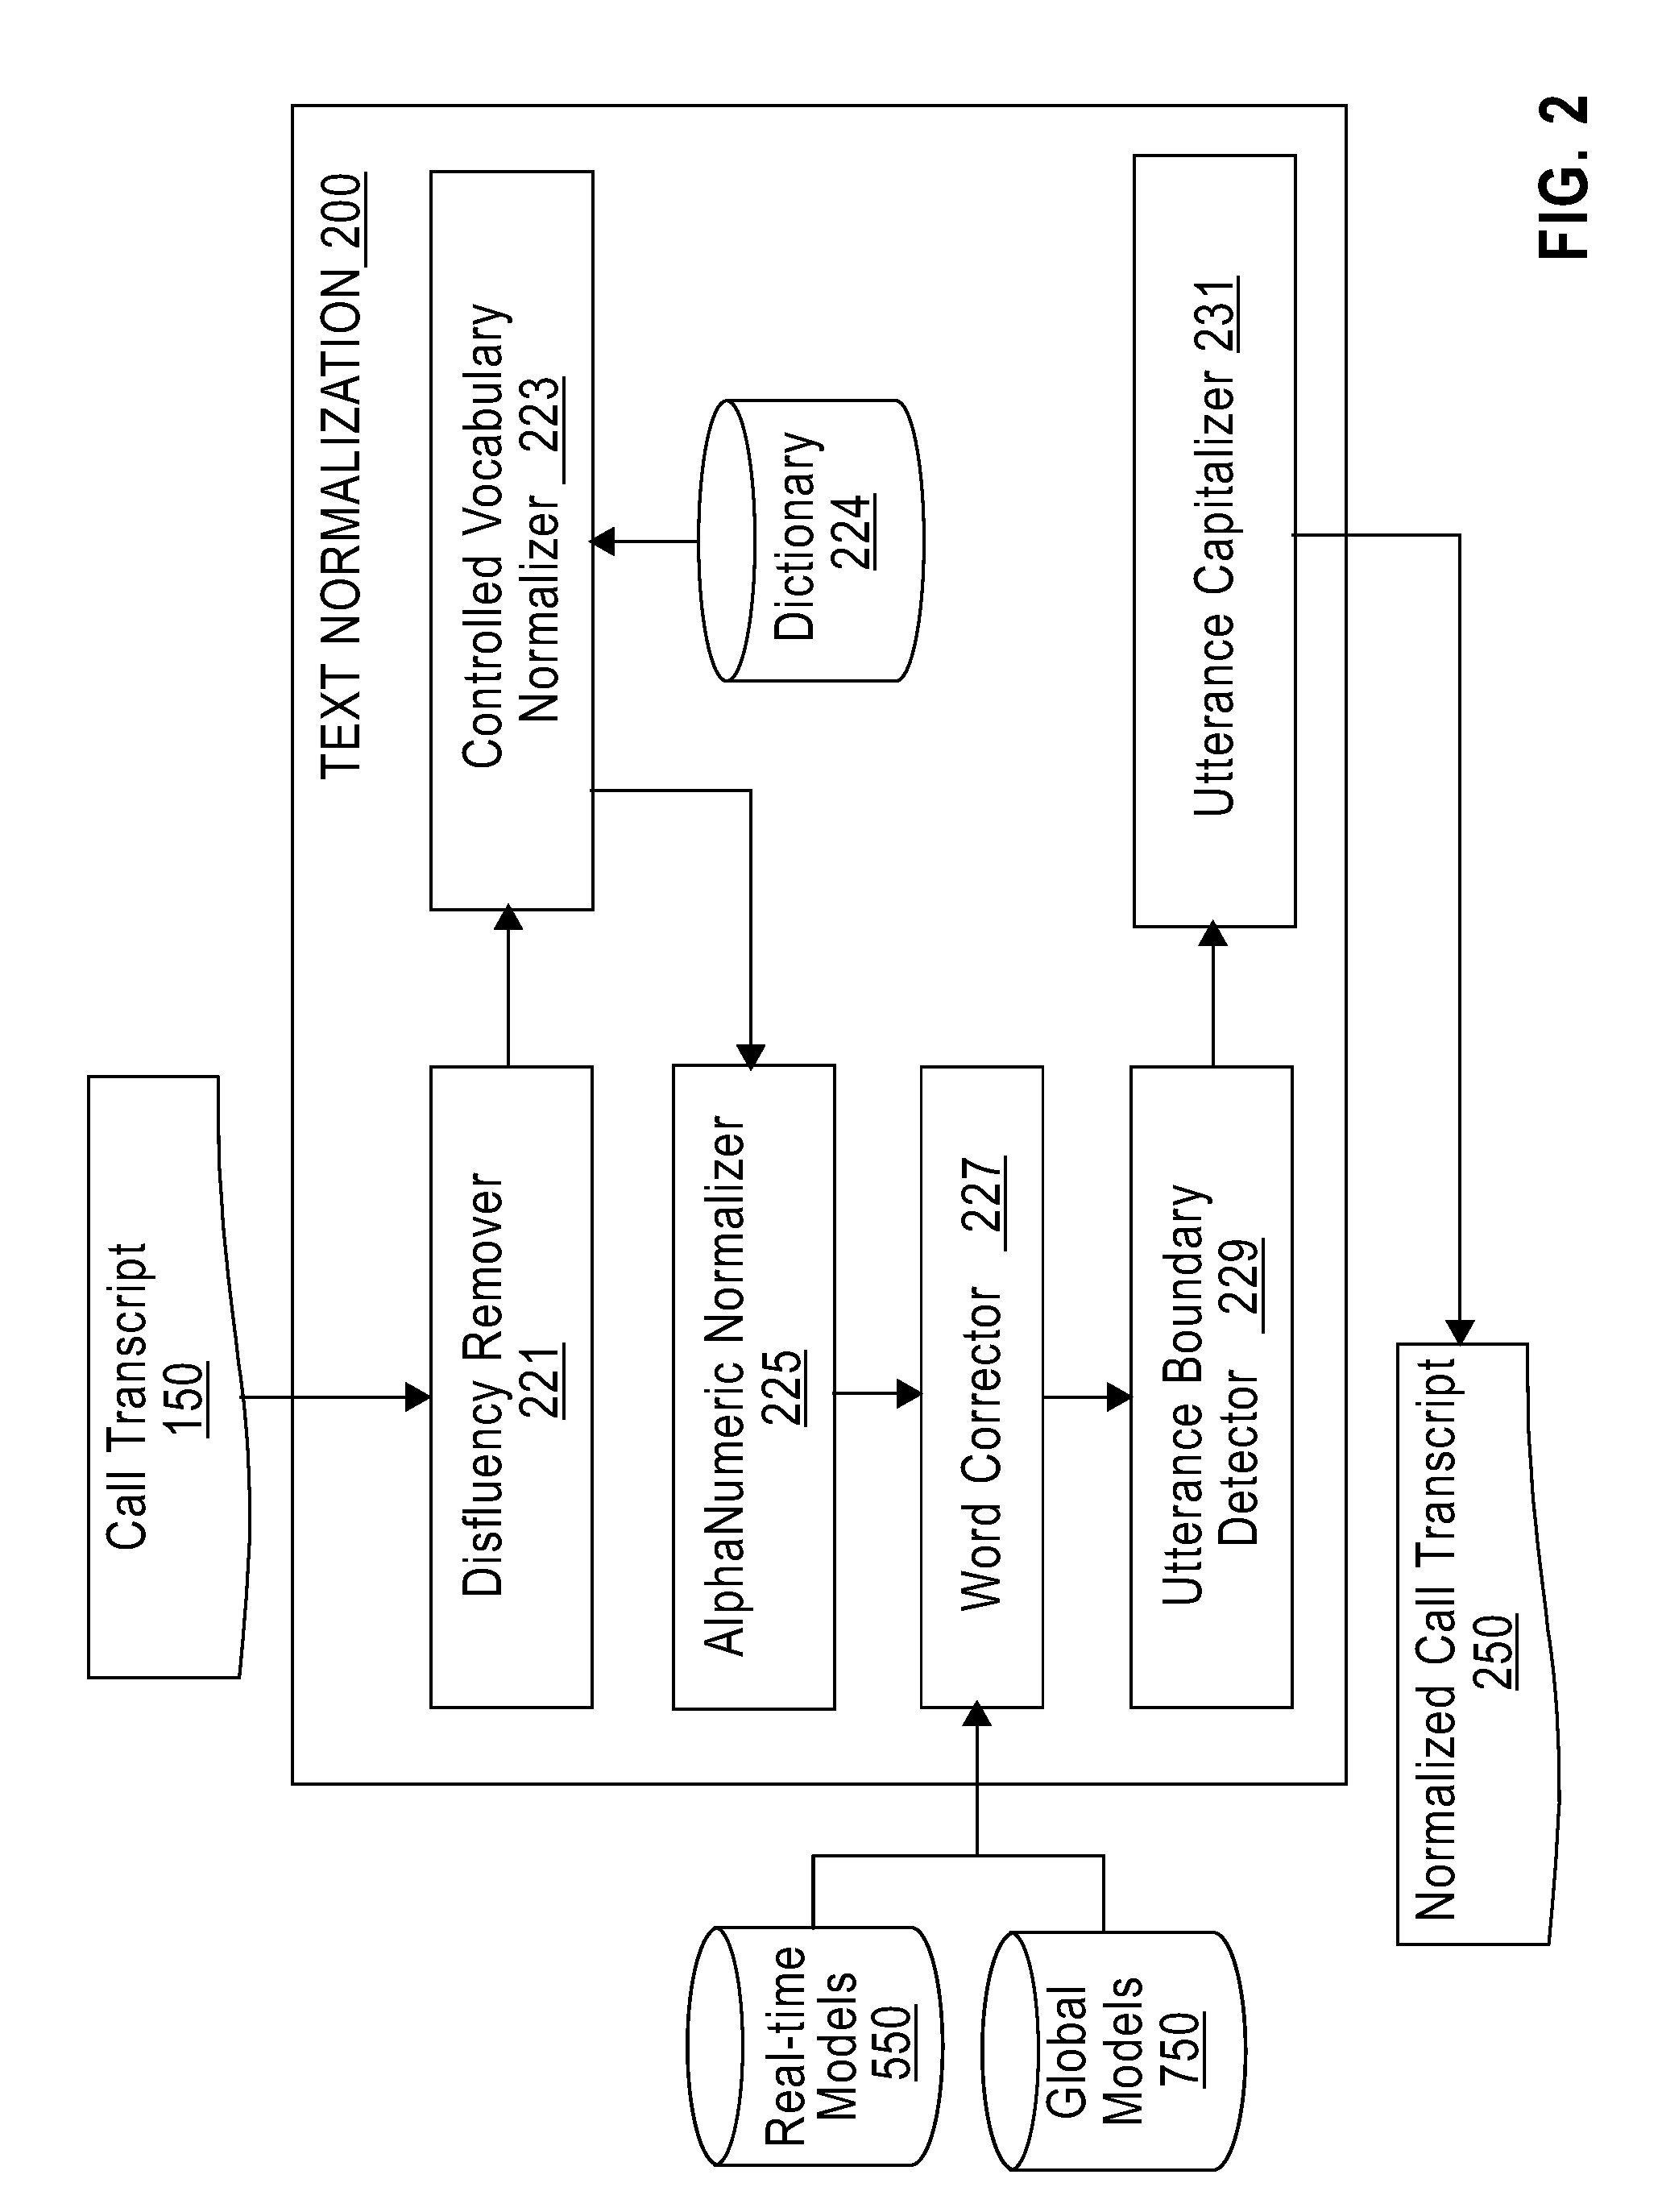 System and Method for Automatically Generating Adaptive Interaction Logs from Customer Interaction Text